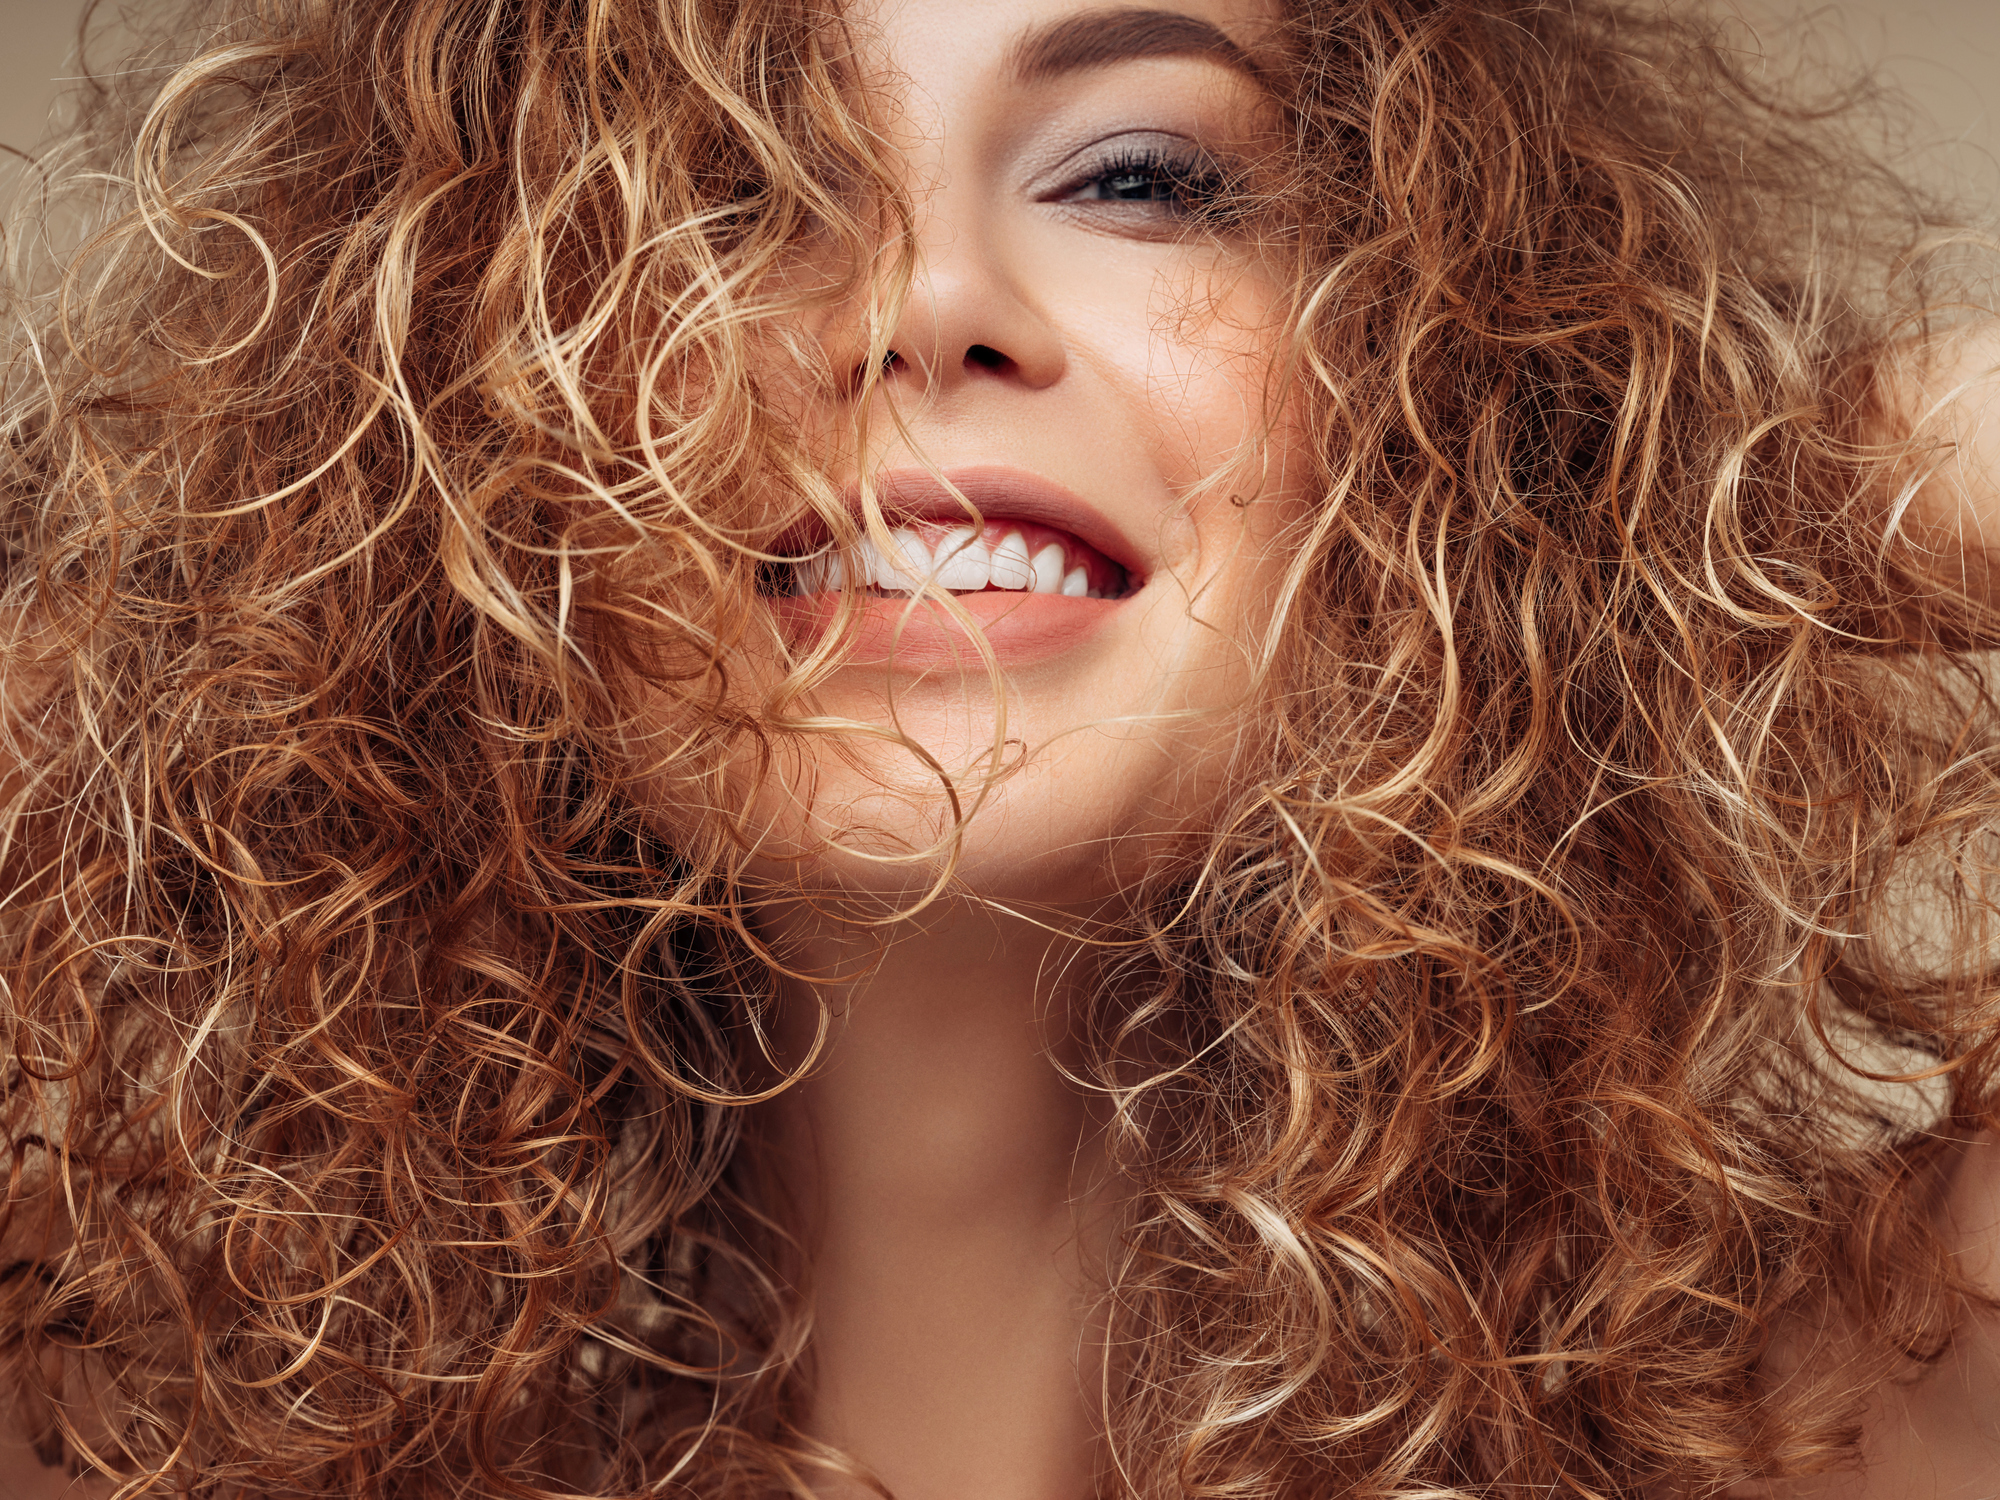 Woman with bouncy, curly brunette hair